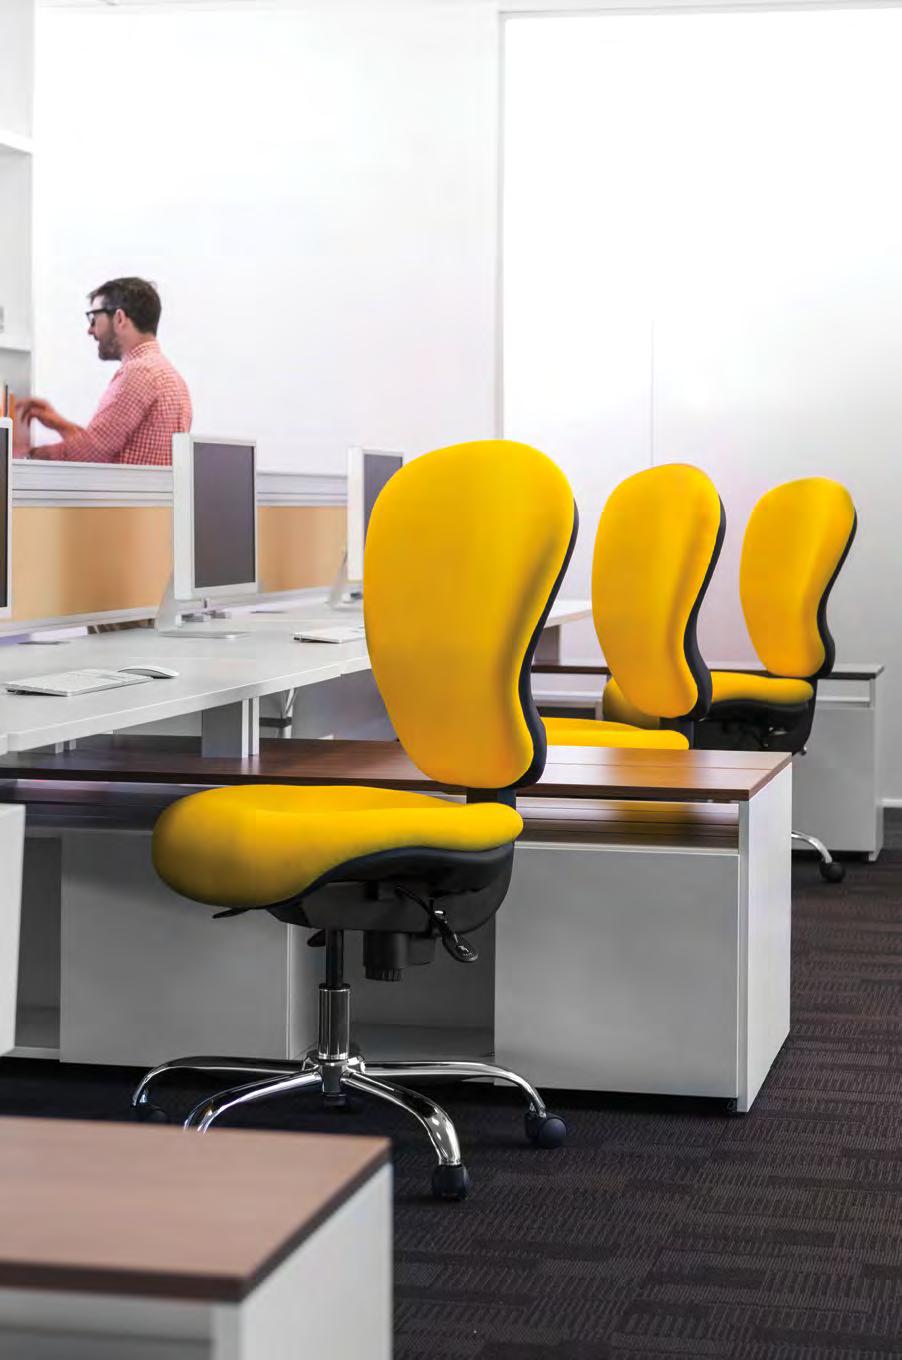 A matching Sphere cantilever visitor chair is also available.